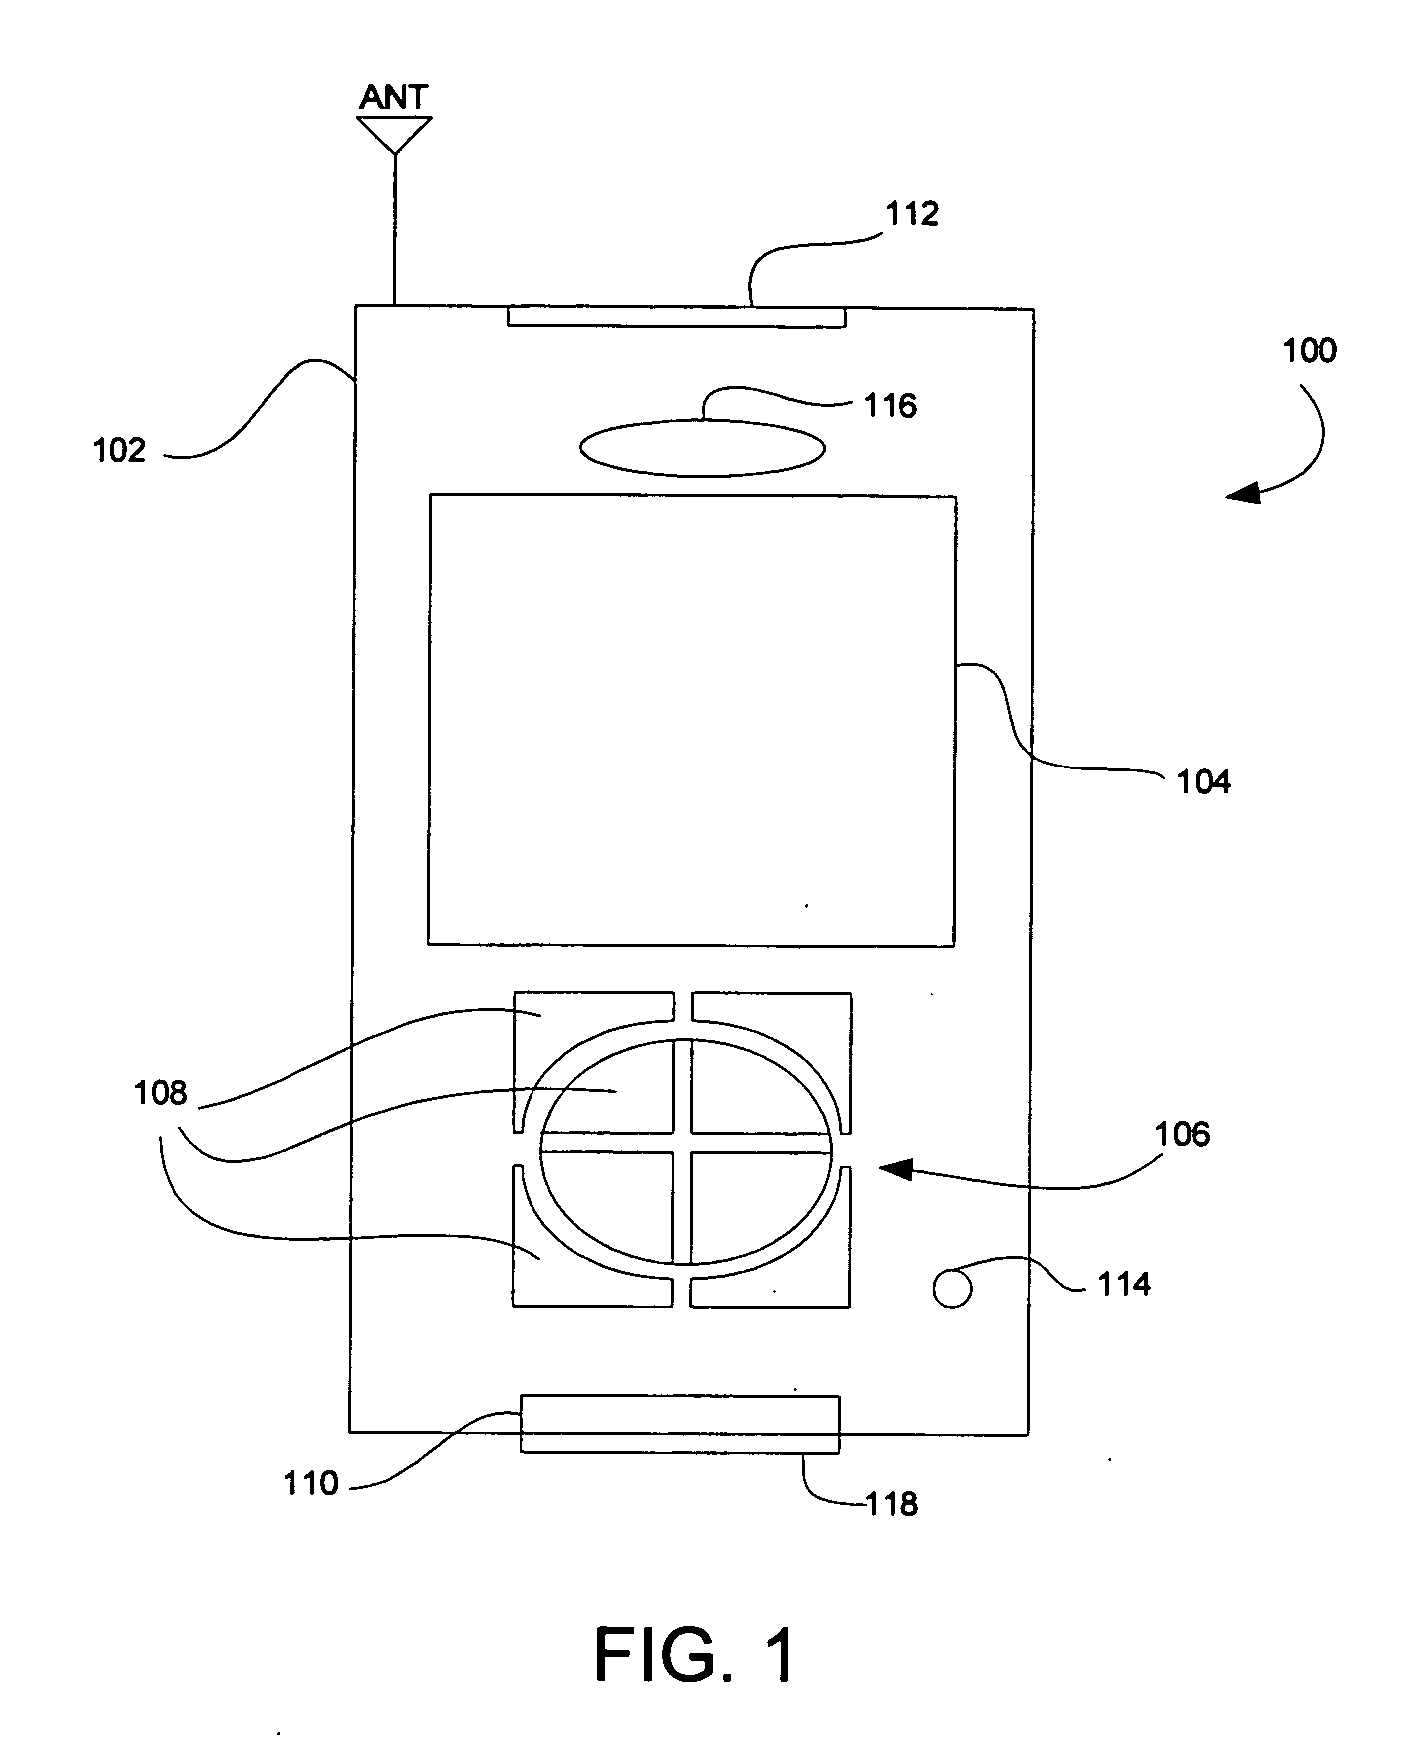 Device, system and method for remotely entering, storing and sharing addresses for a positional information device